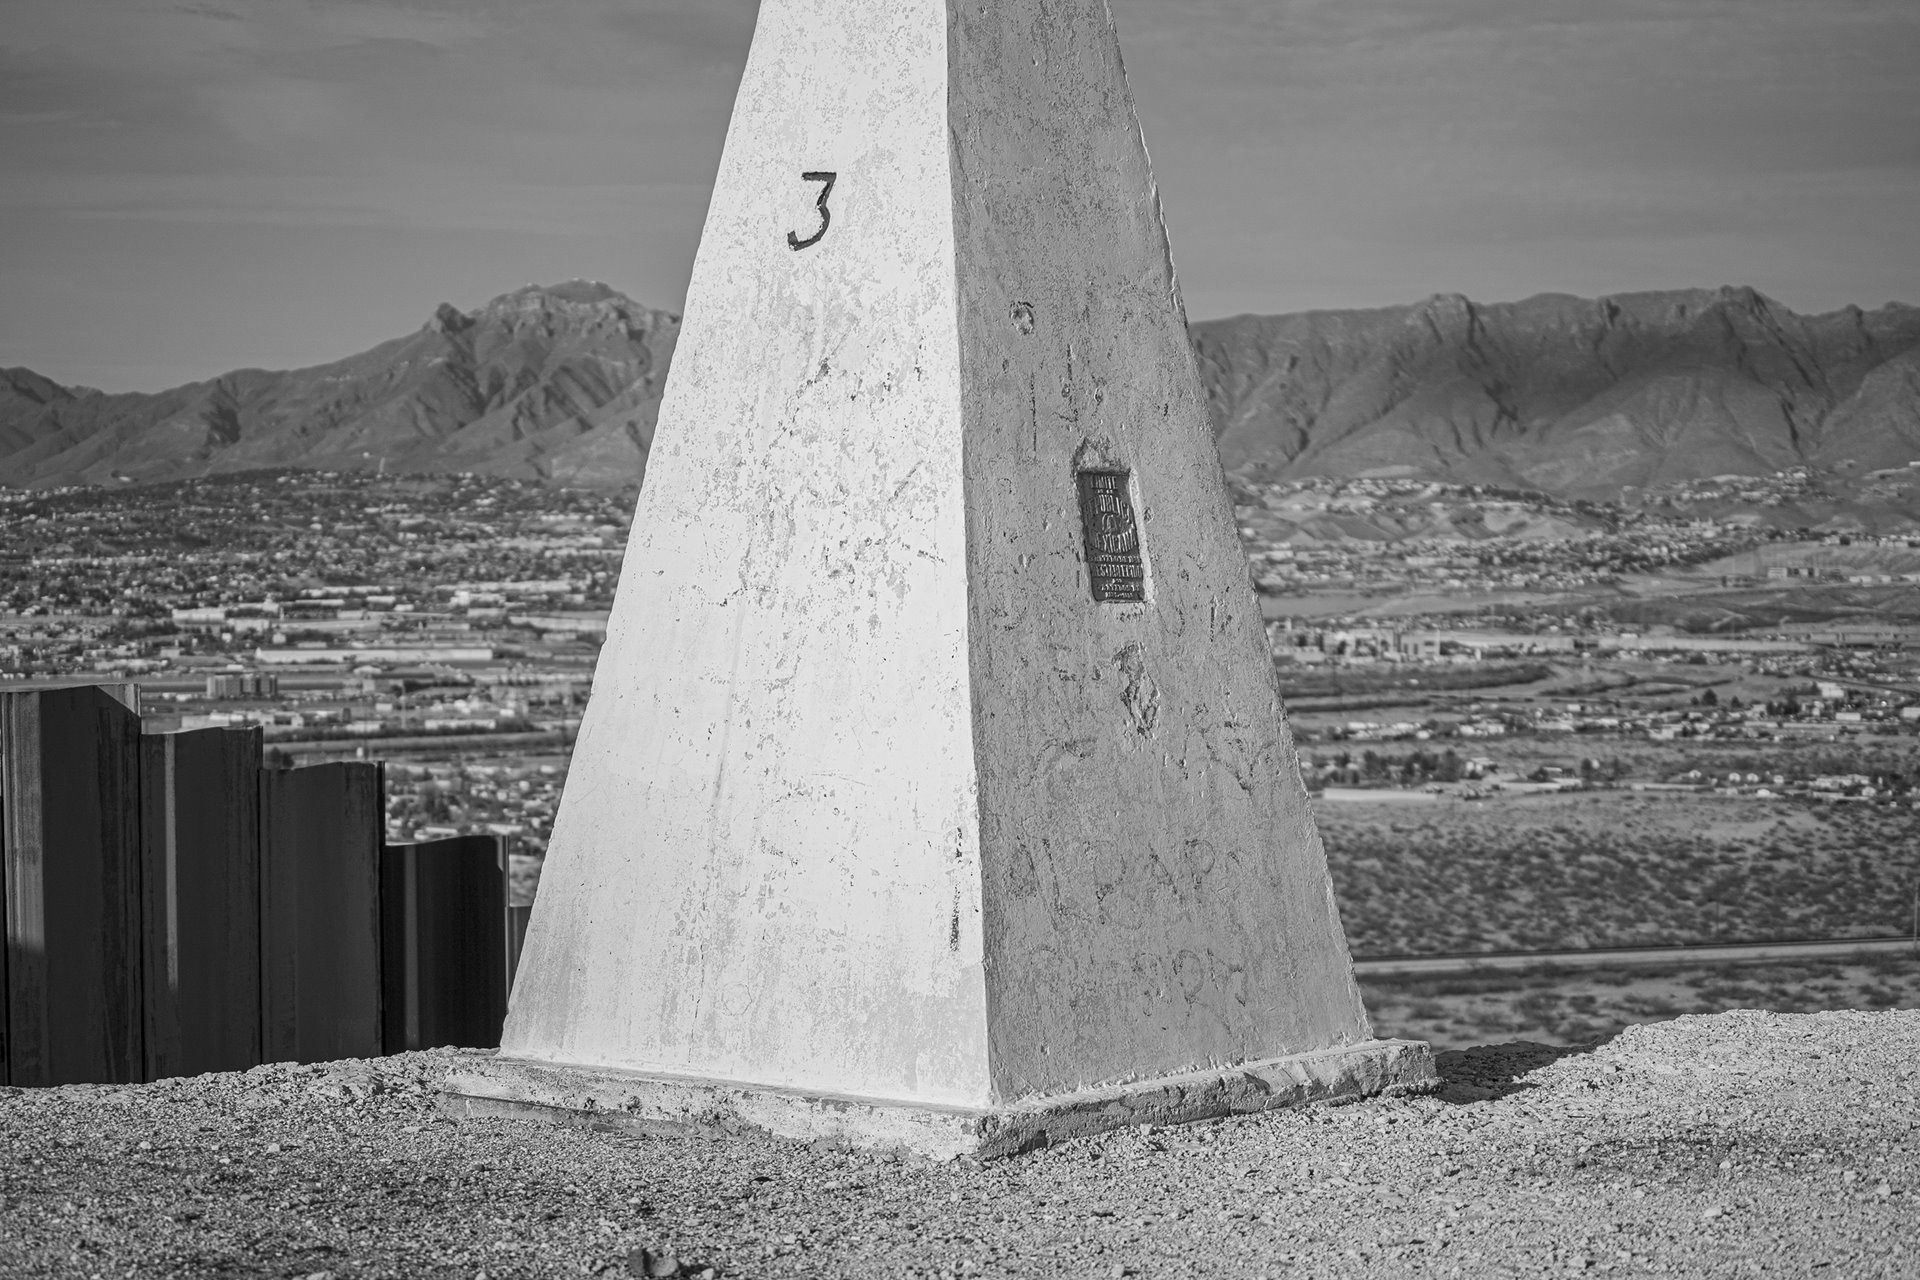 A monolith marks the international border between Mexico and the United States in Juárez, Mexico. These structures were built at the end of the 19th century, after the Mexican-American War, in which Mexico lost 55% of its land to the United States. Along the border, some of these markers stand alongside steel and concrete barriers, and in other places they can be found next to cattle fences, dirt roads, or open countryside.&nbsp;